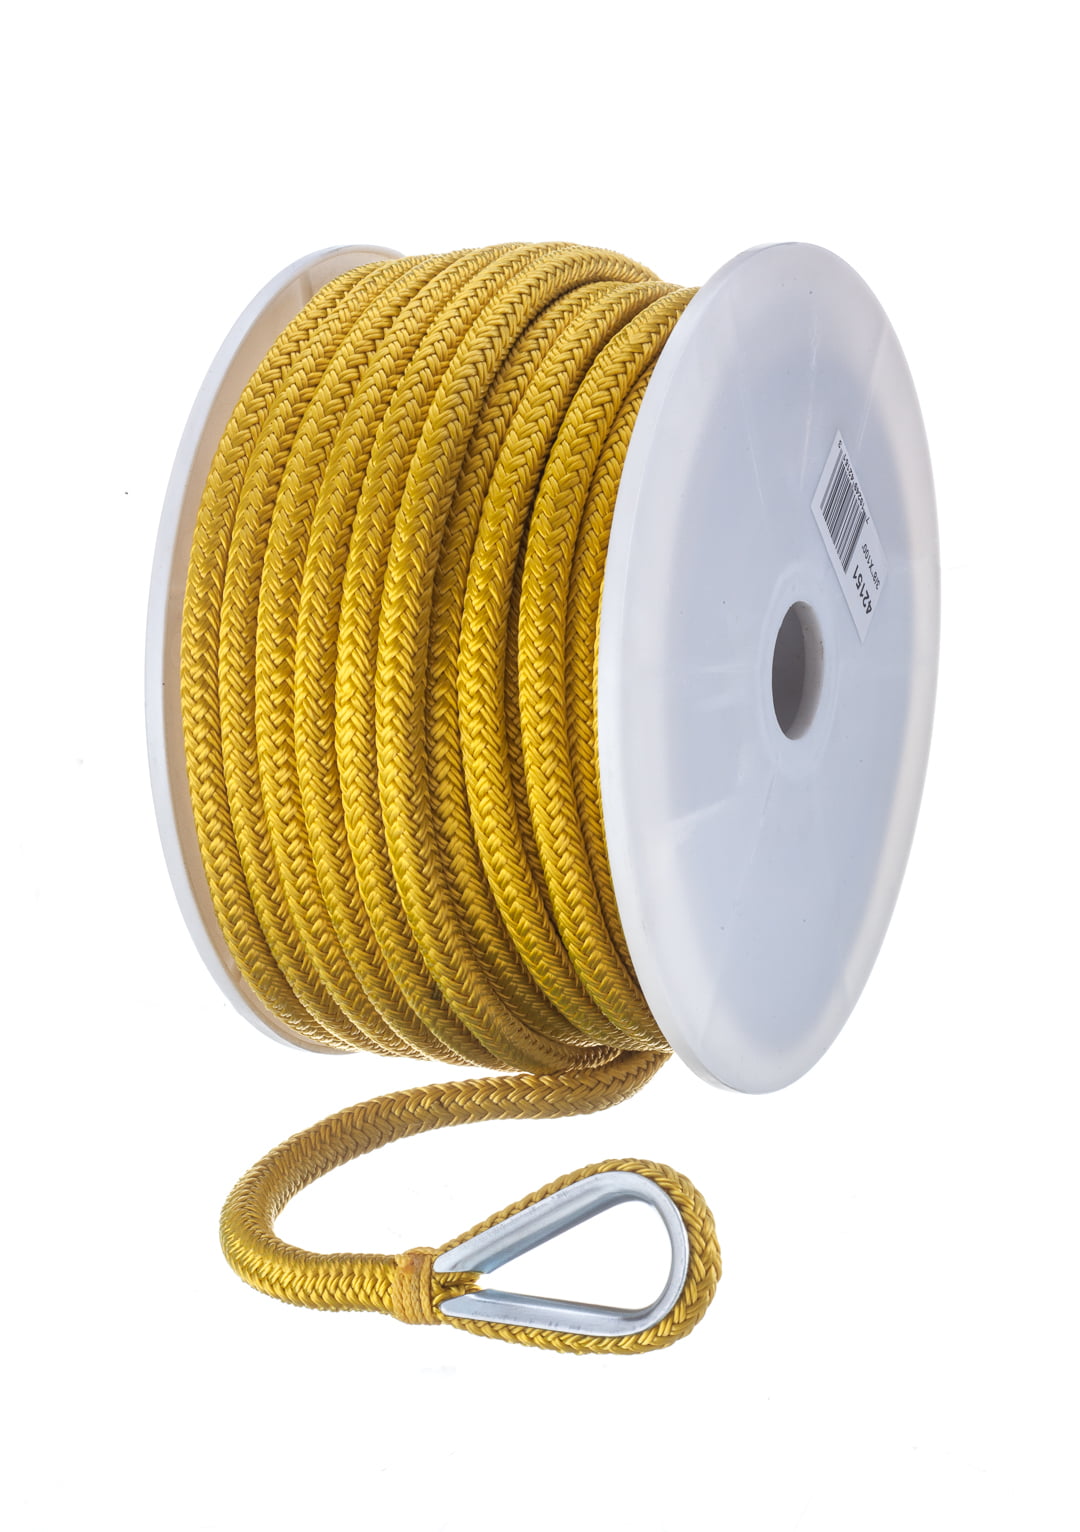 ANCHOR ROPE DOCK LINE 3/8" X 100' BRAIDED 100% NYLON YELLOW MADE IN USA